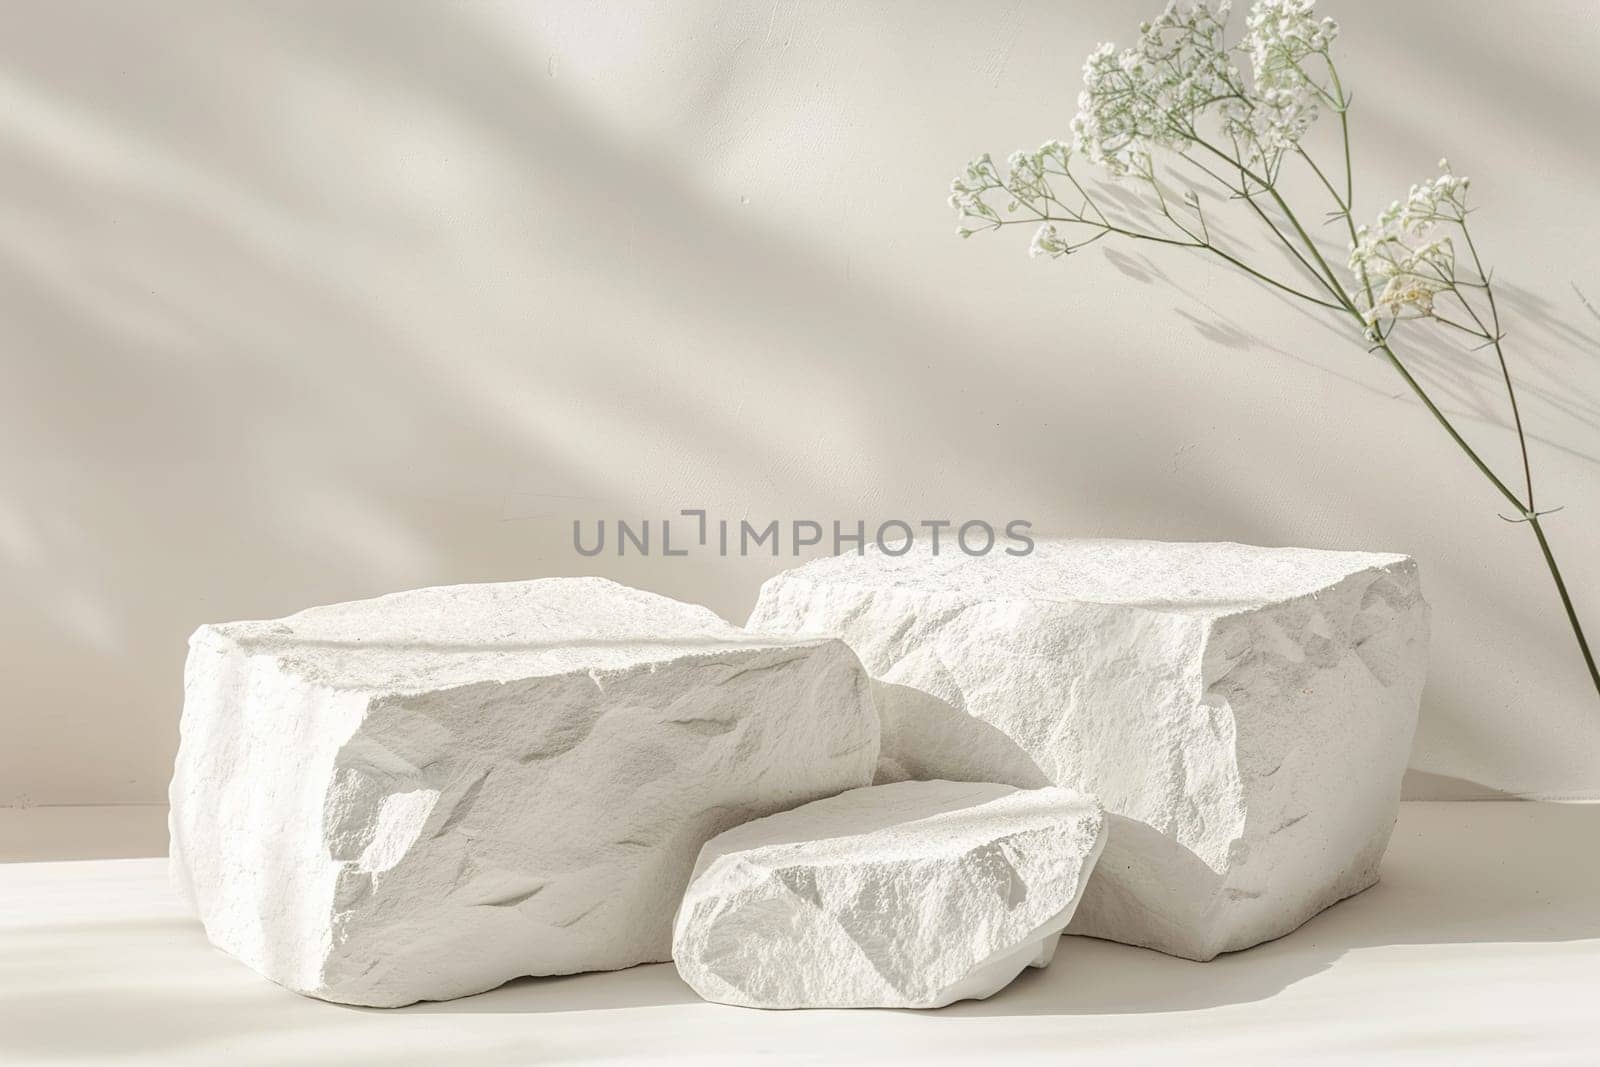 Minimalist Nordic design podium with soft shadows and a sprig of flowers, perfect for product display, interior design elements, or calm natural themes. Generative AI